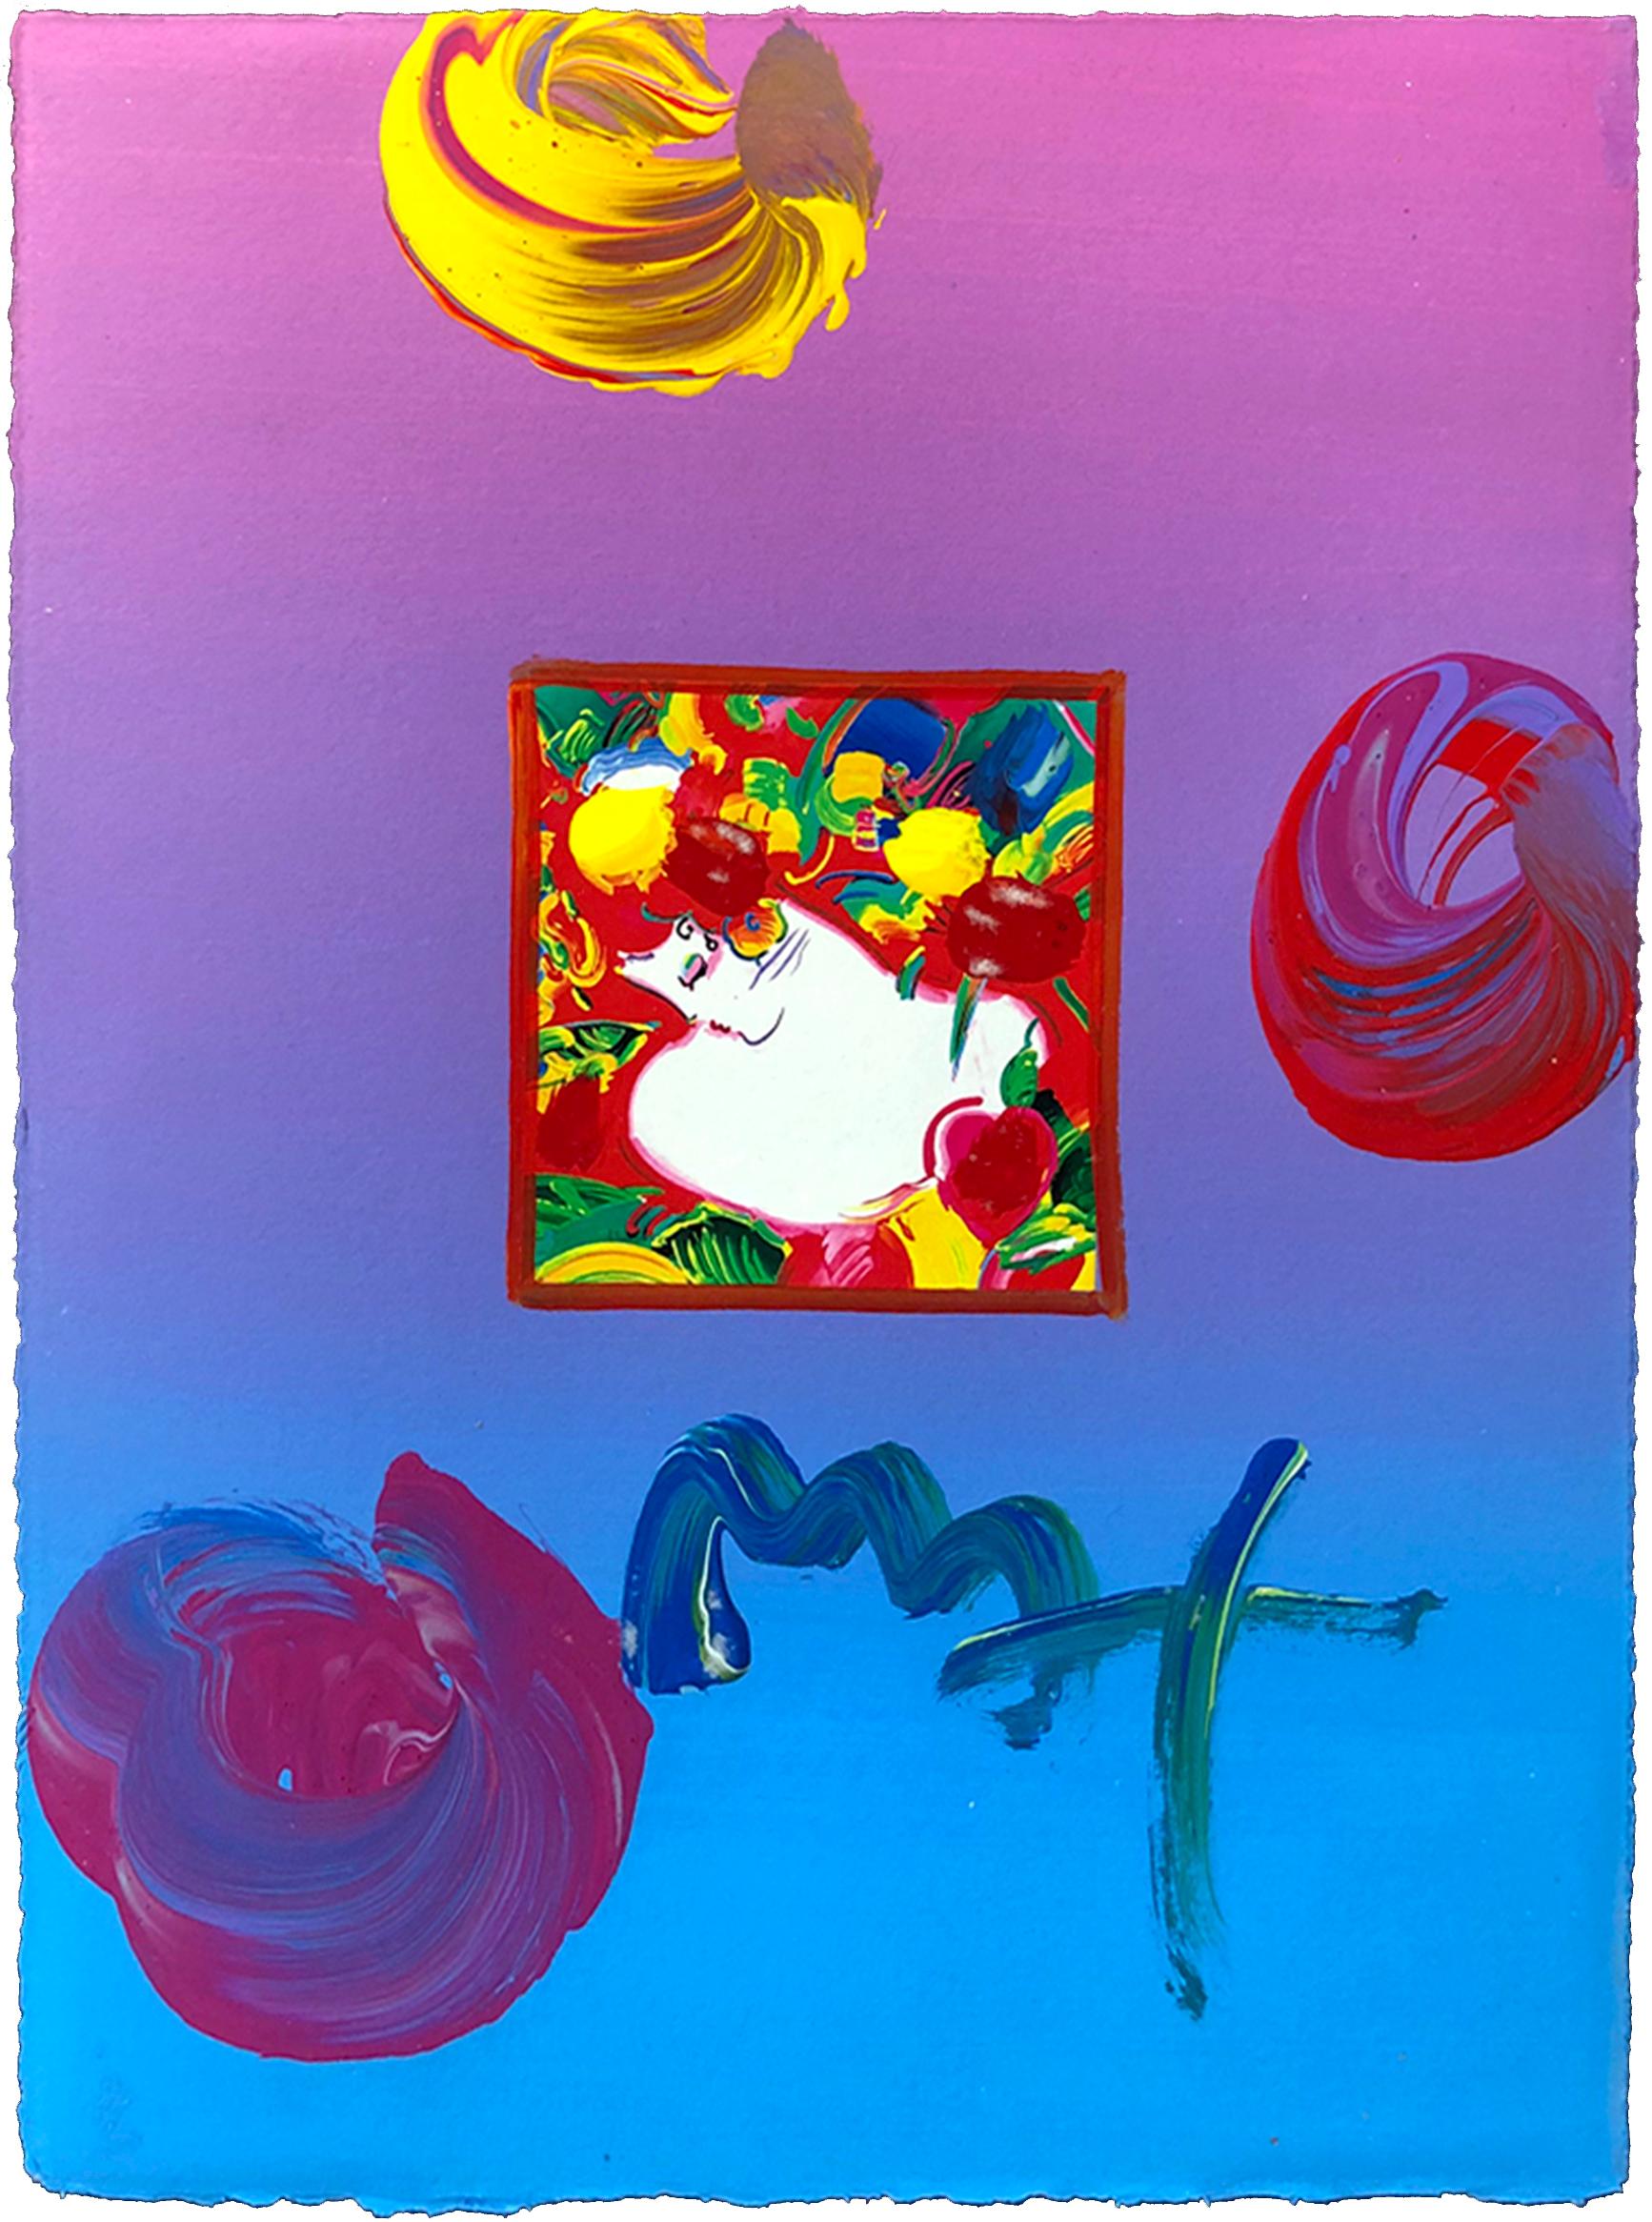 FLOWER BLOSSOM LADY (OVERPAINT) - Pop Art Mixed Media Art by Peter Max